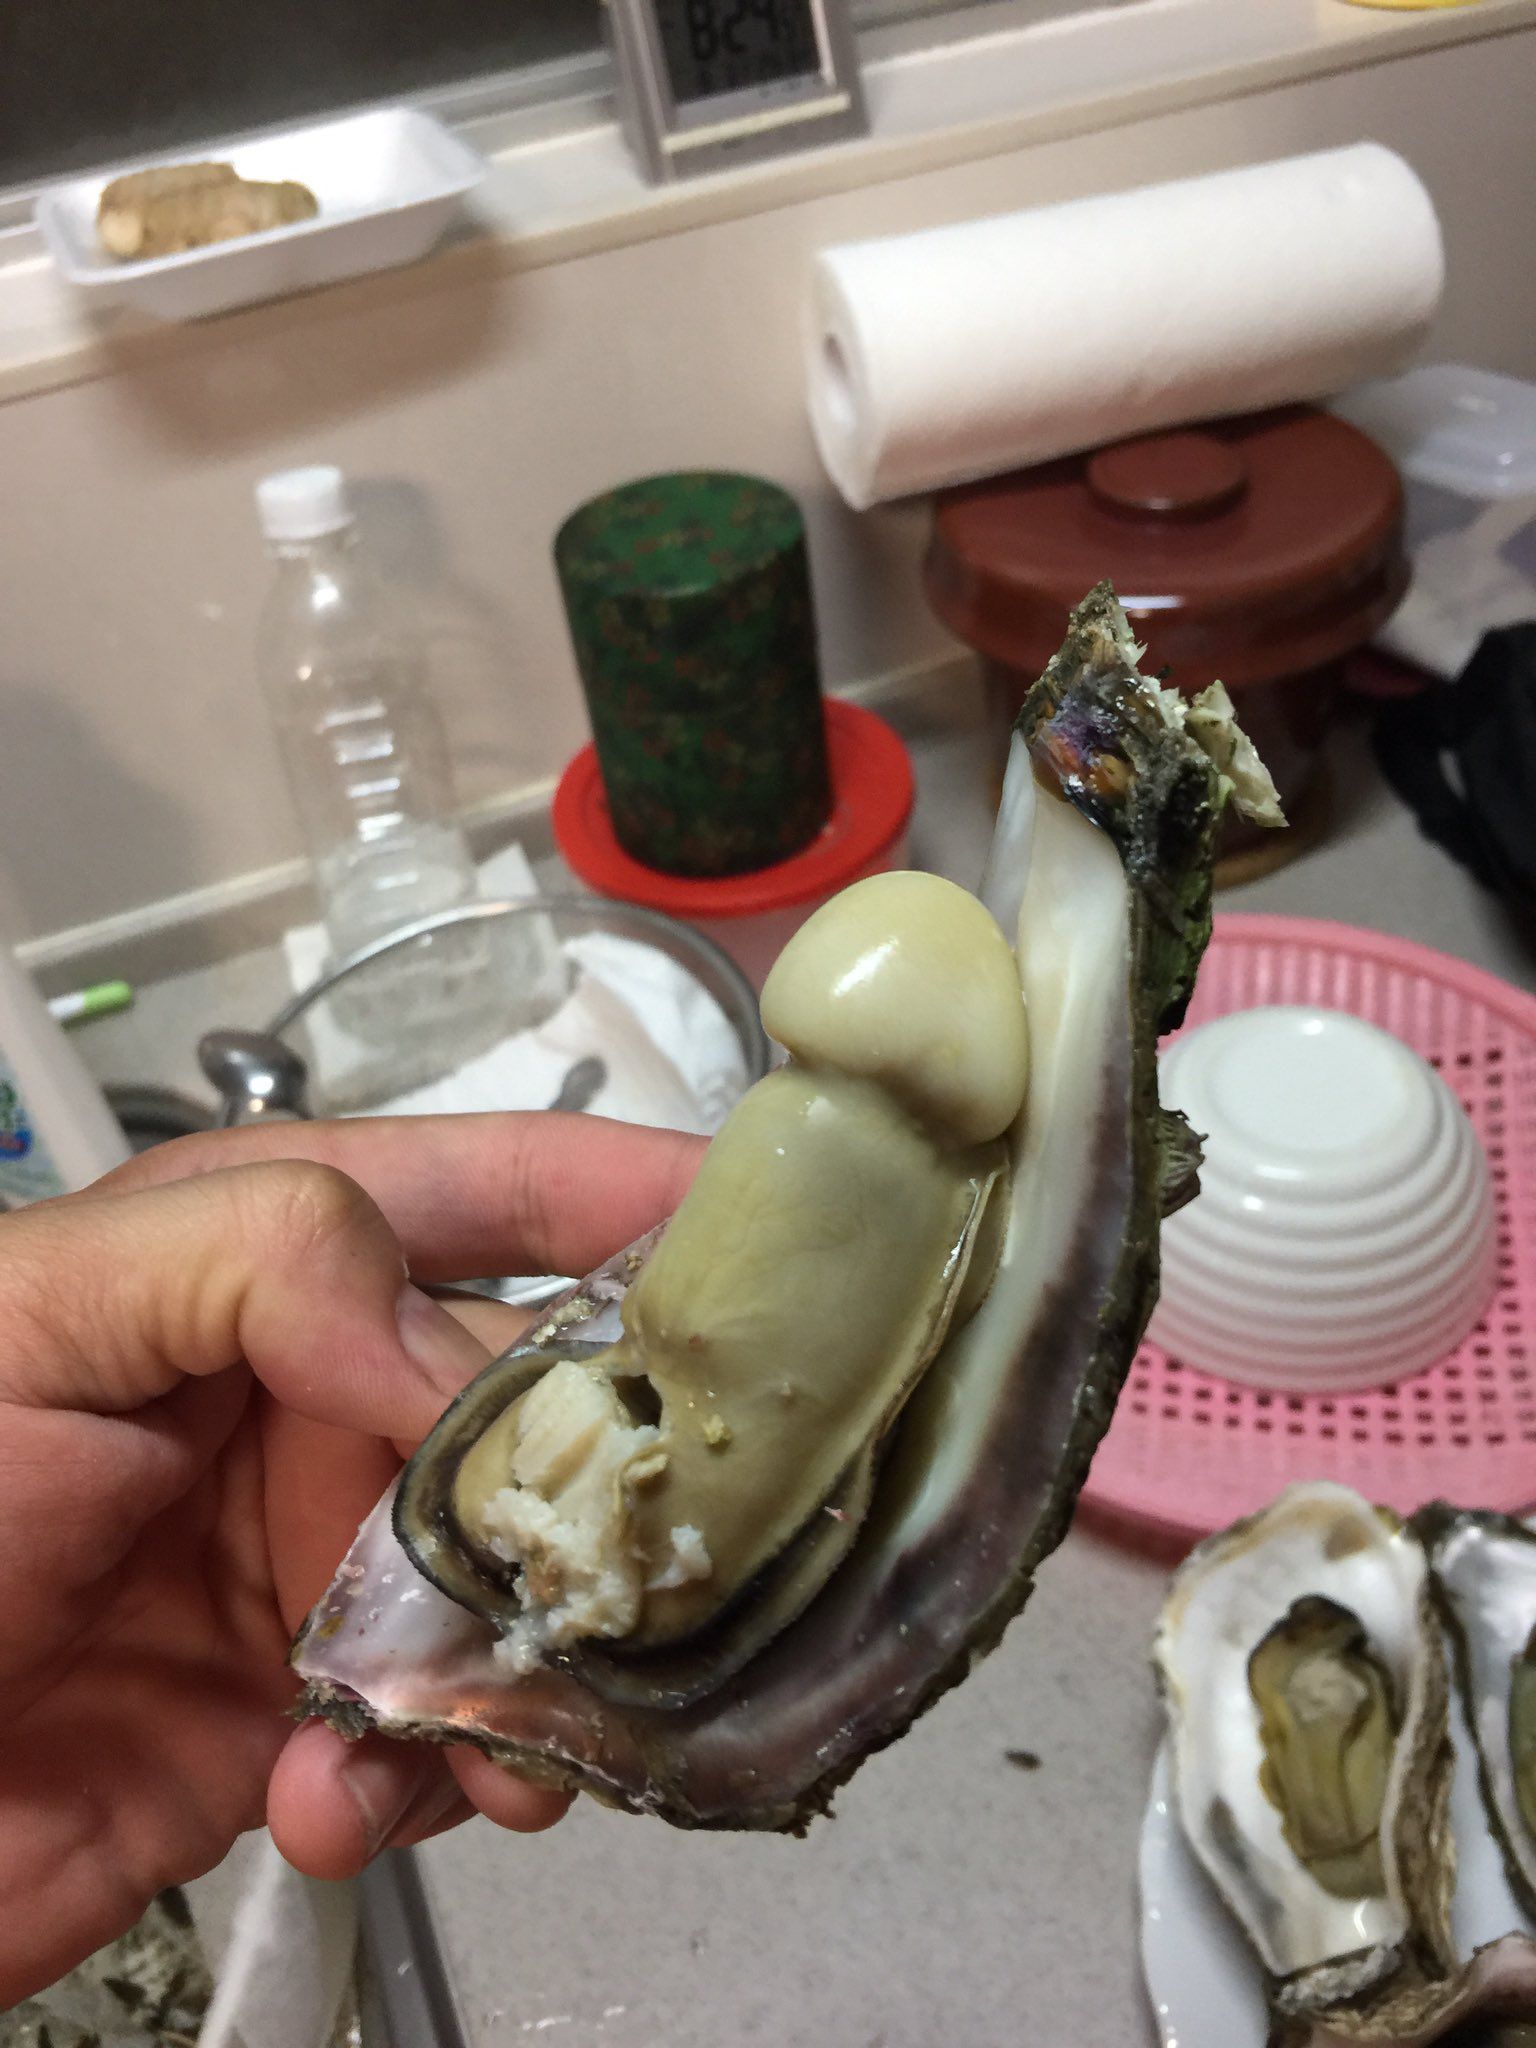 Daddy, I don't want to eat my oyster...